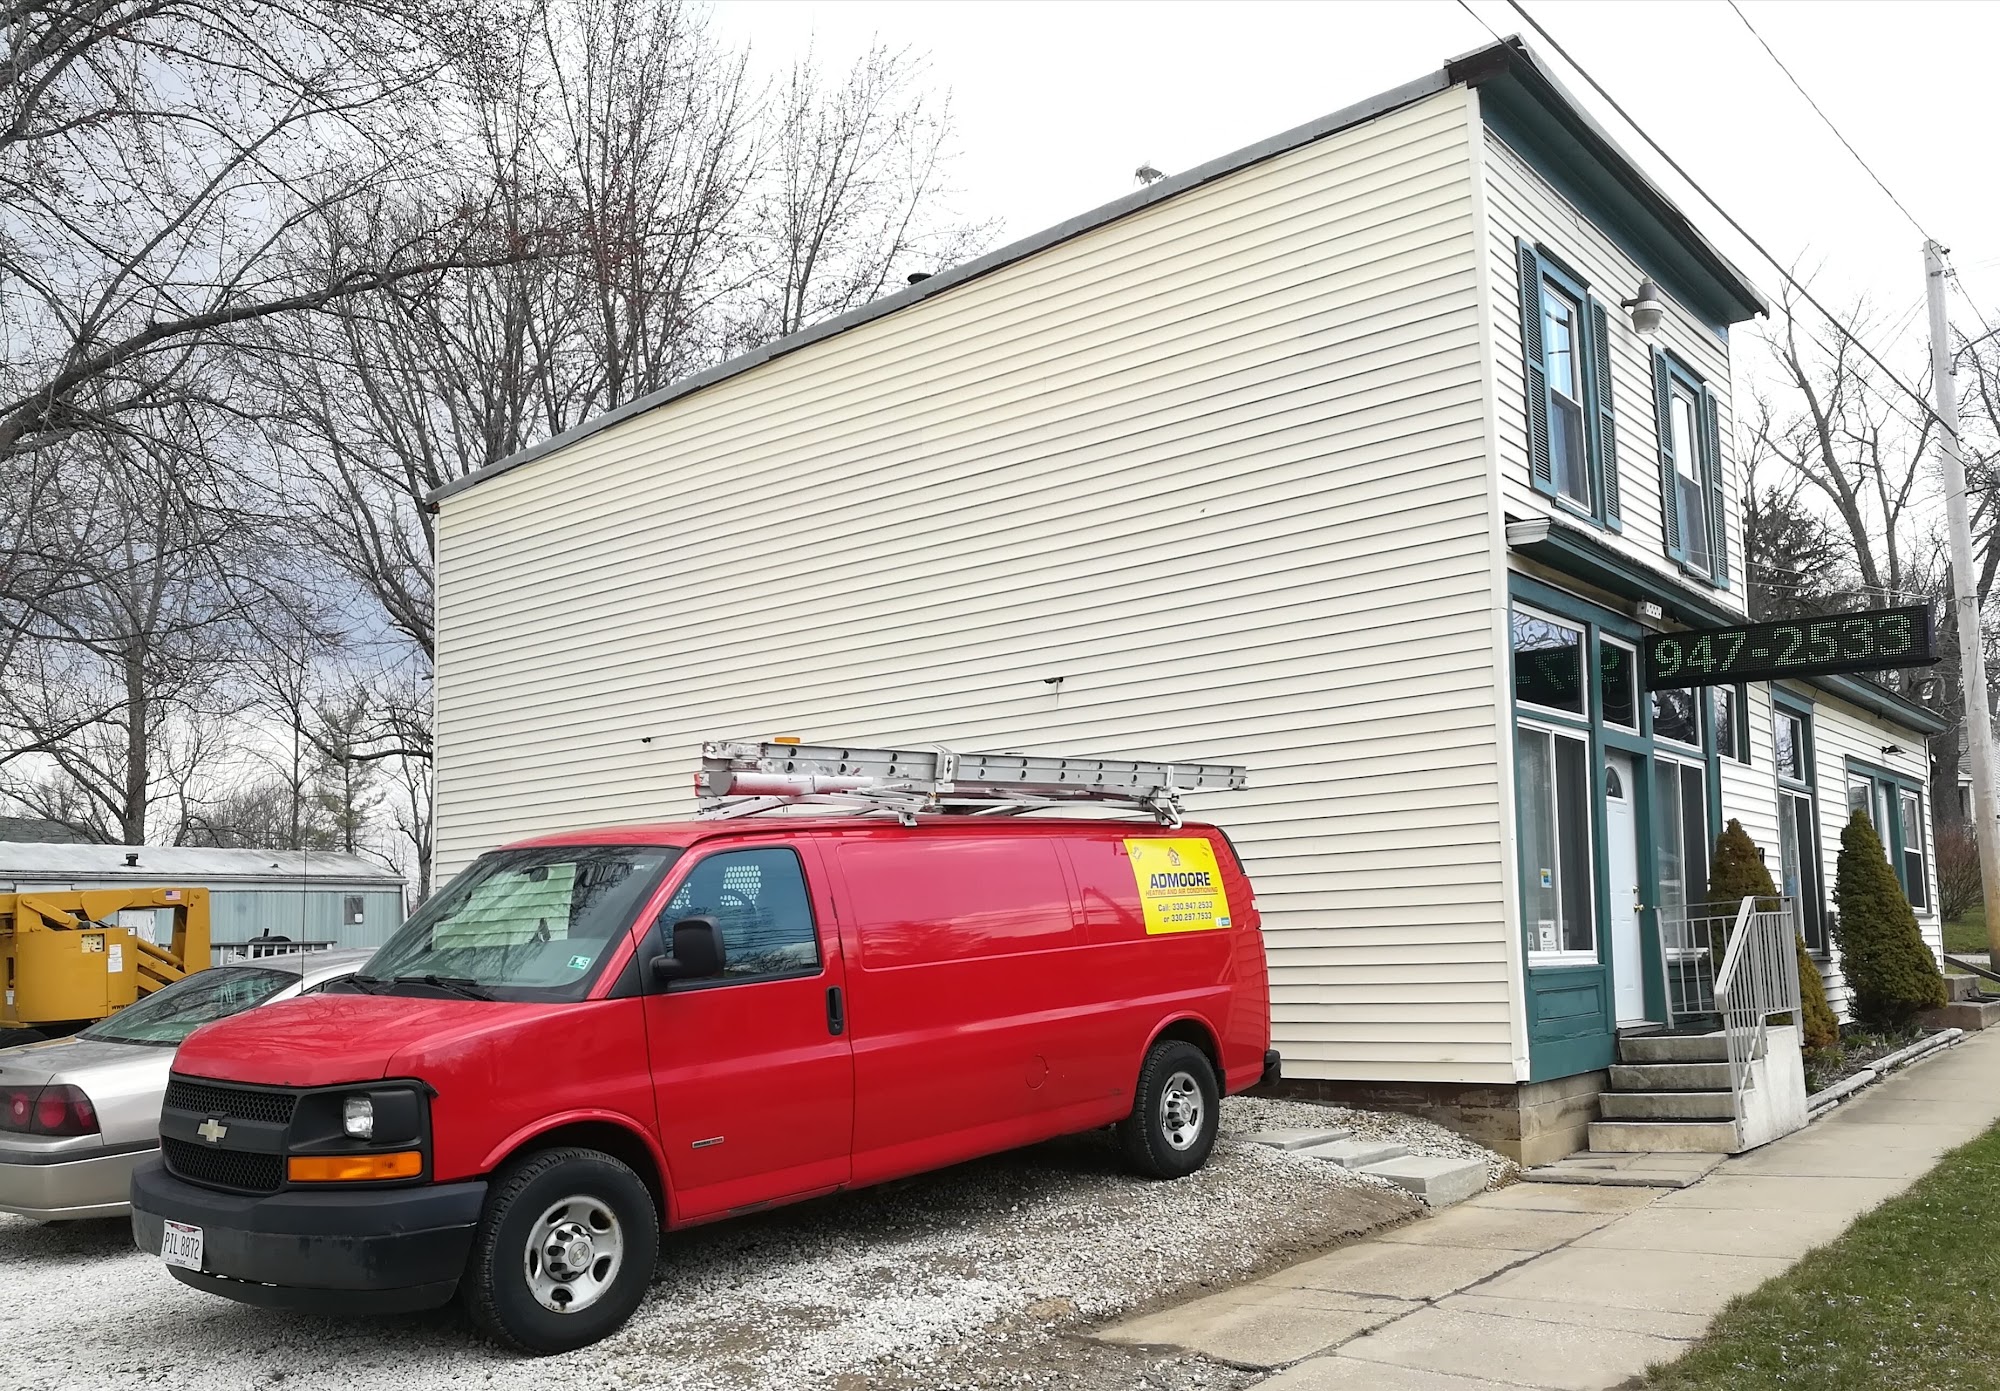 Admoore Heating & Air Conditioning 6351 Waterloo Rd, Atwater Ohio 44201